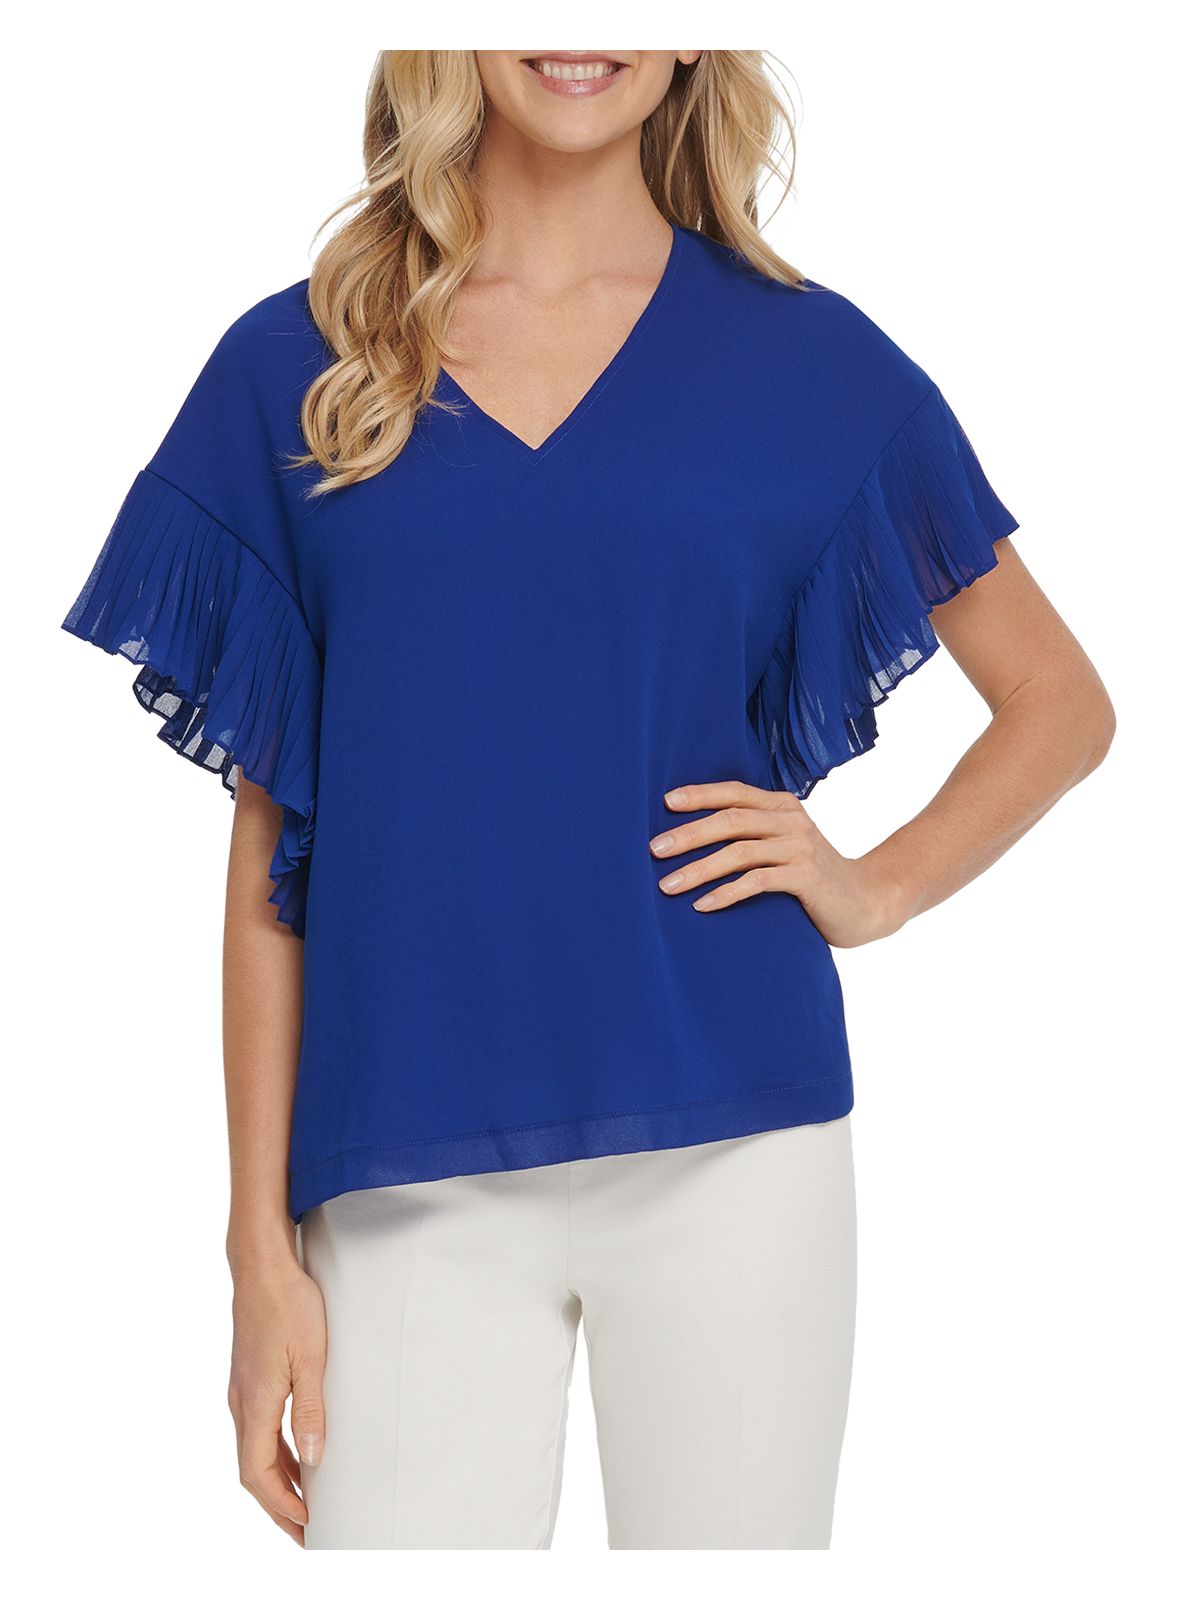 DKNY Womens Blue Sheer Pleated Lined Flutter Sleeve V Neck Top XS